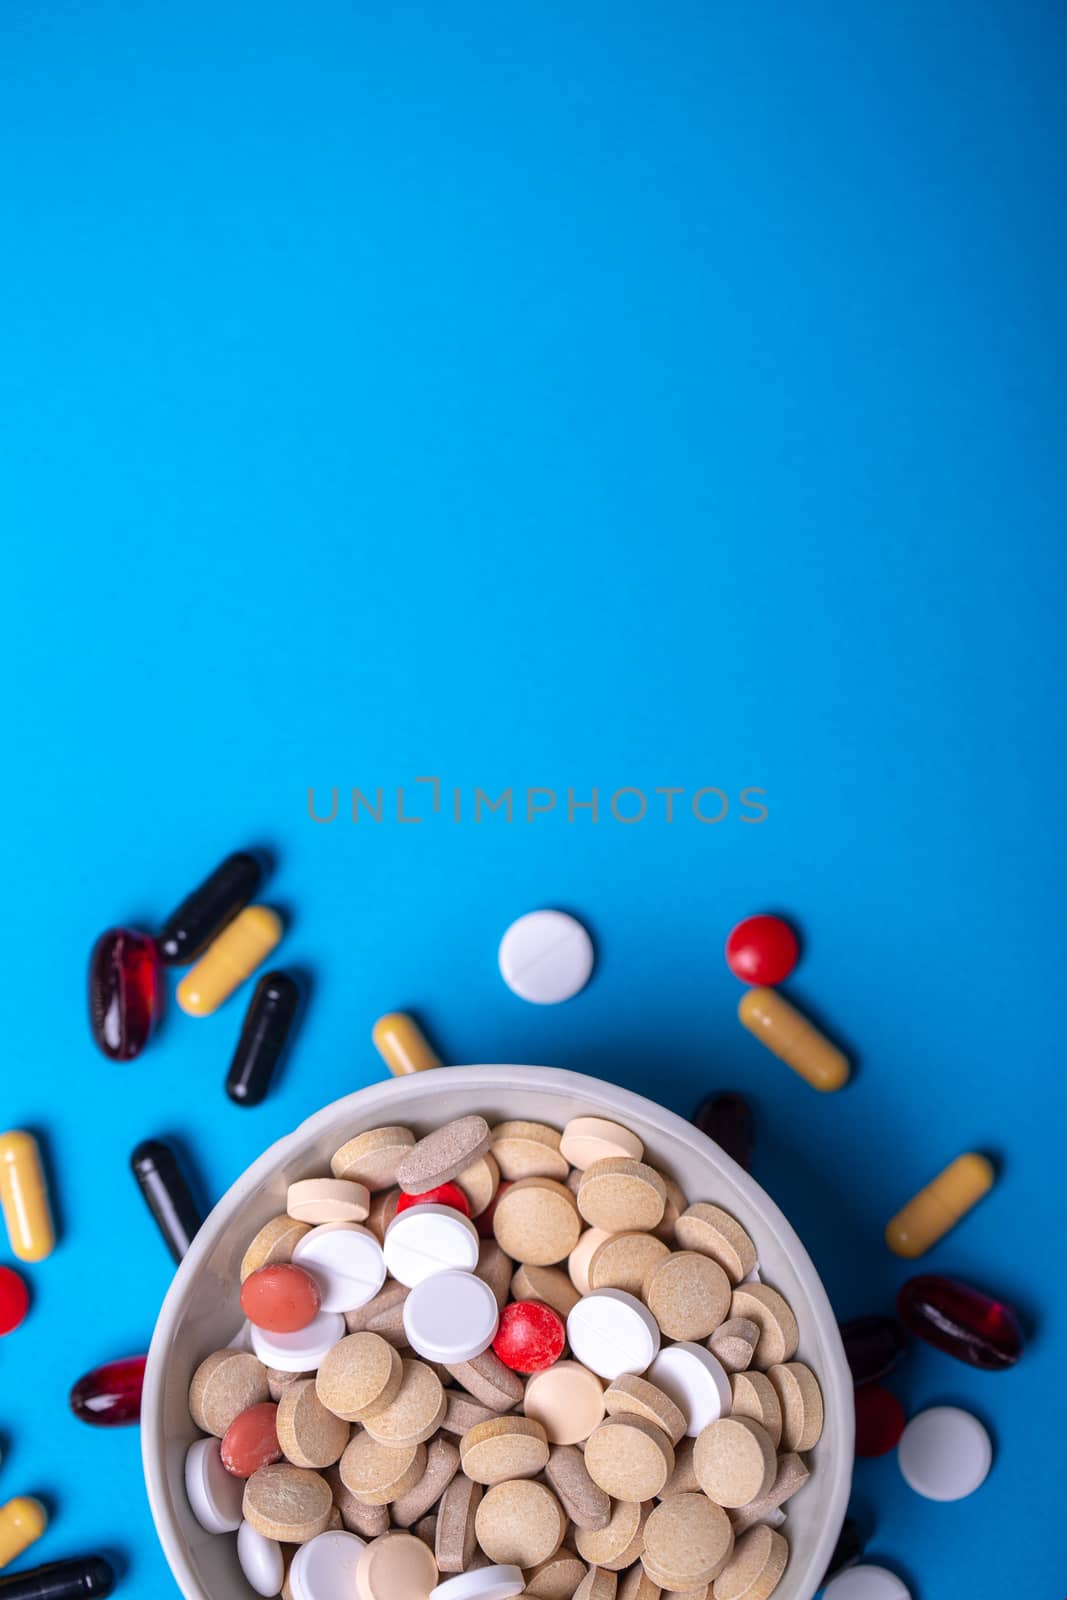 Top view with a bowl with pills of different colors and a place for copy space. Macro and blue background